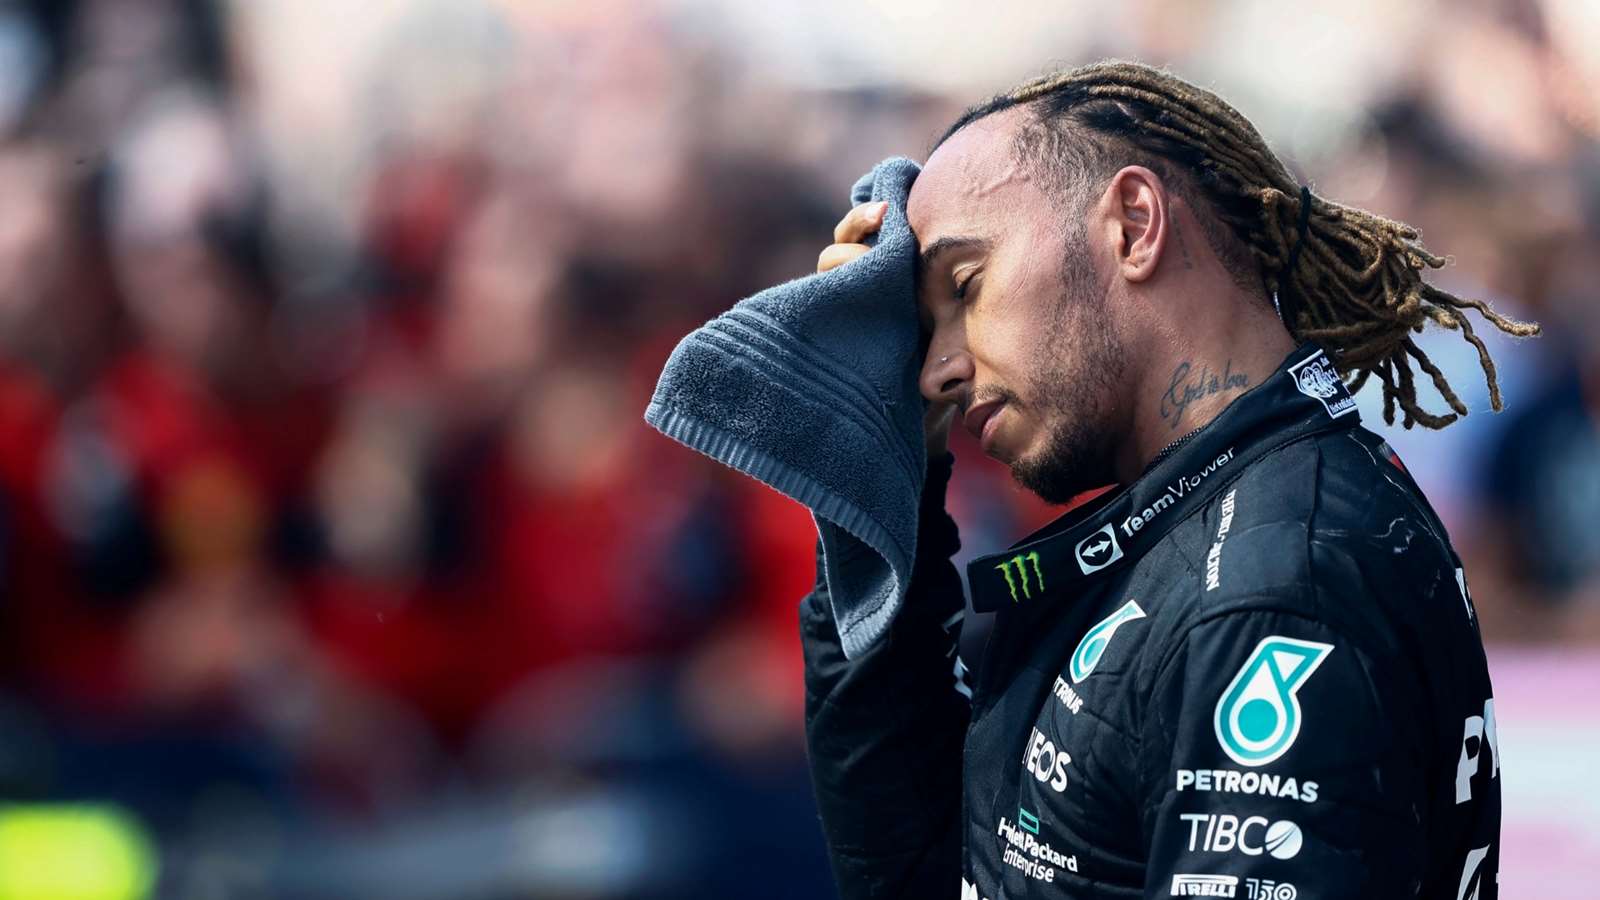 Lewis Hamilton: I'm not done yet. I've got more to achieve